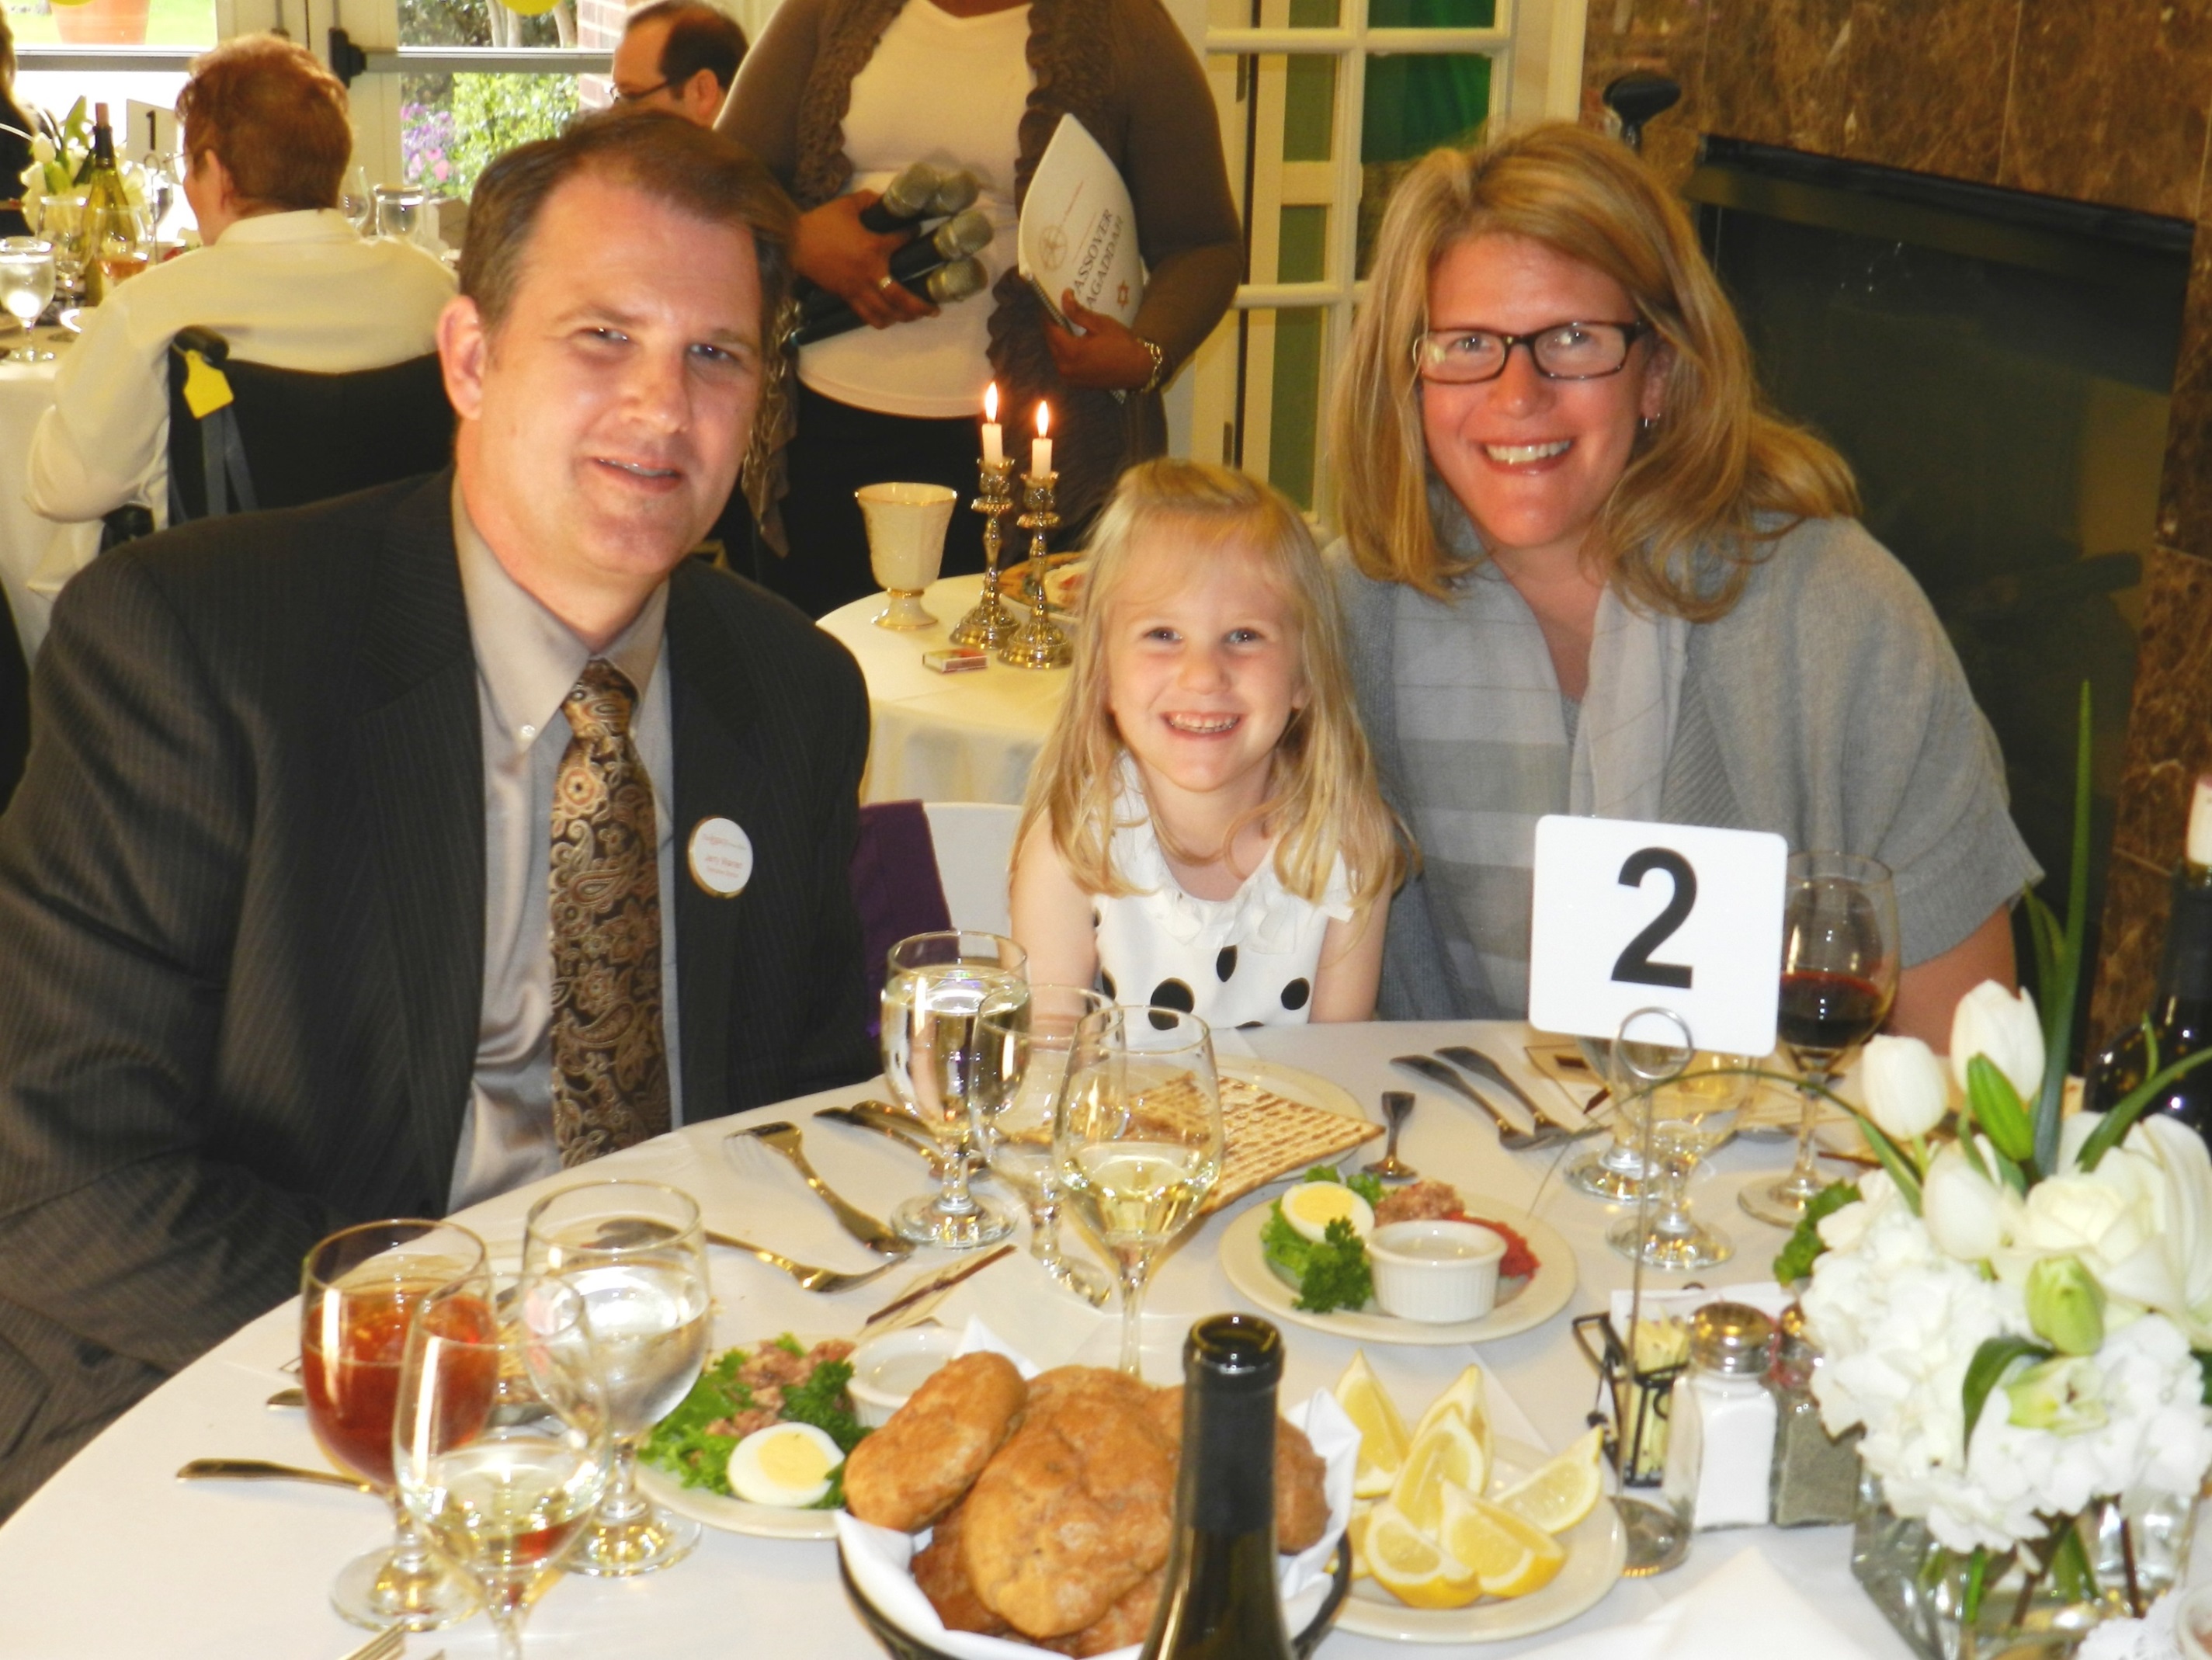 Executive Director of The Legacy Preston Hollow Jerry Warren with daughter Simonne and wife Kristin